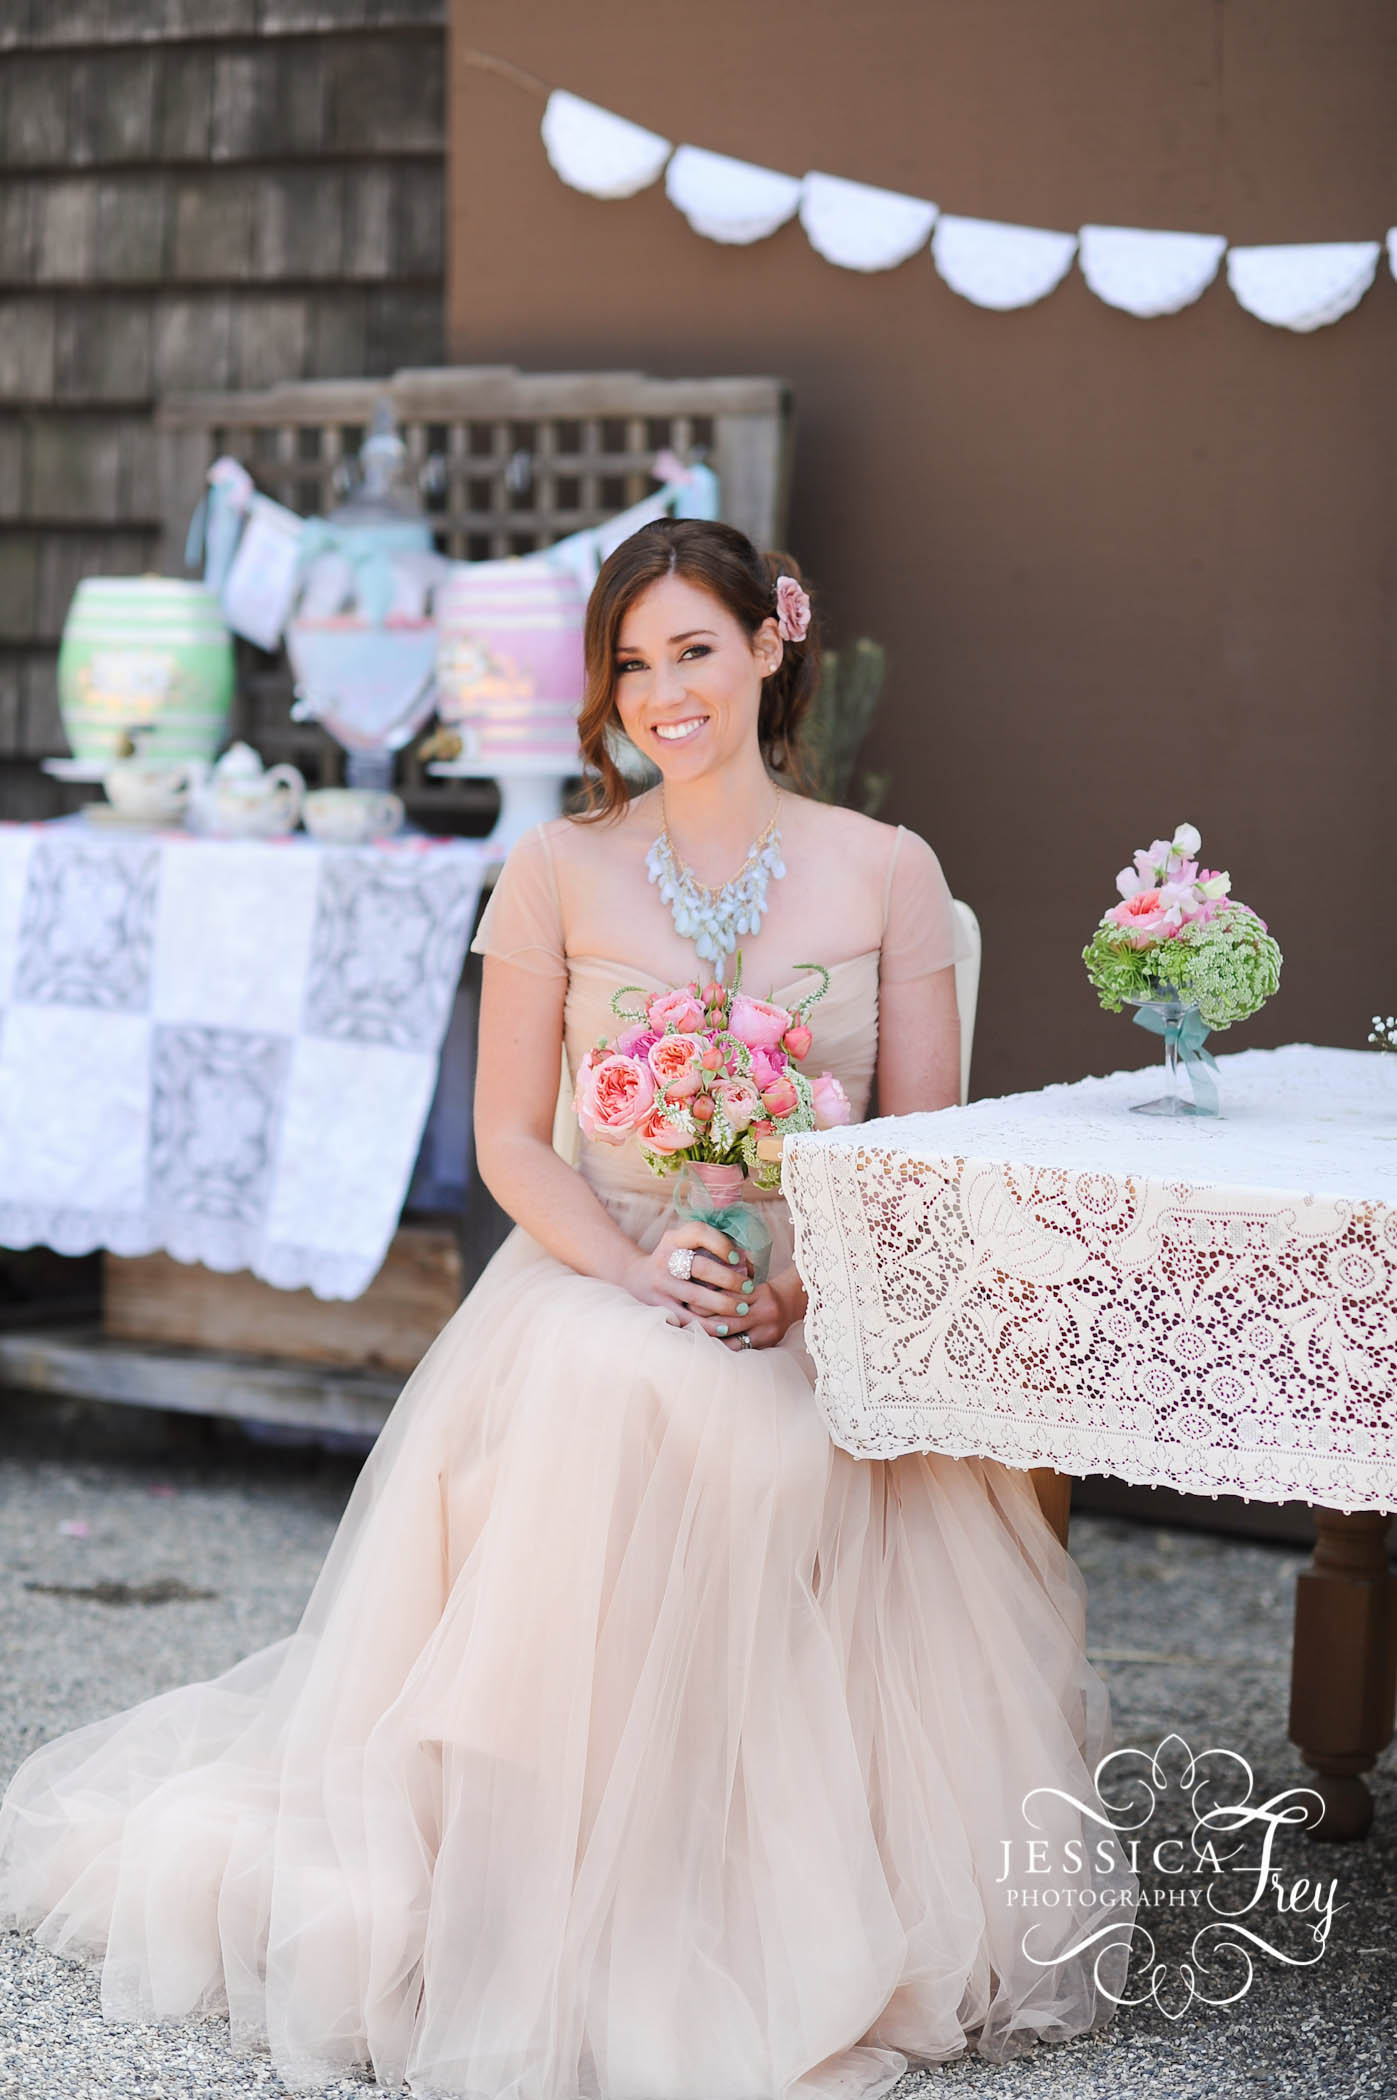 Jessica Frey Photography, mint and pink wedding